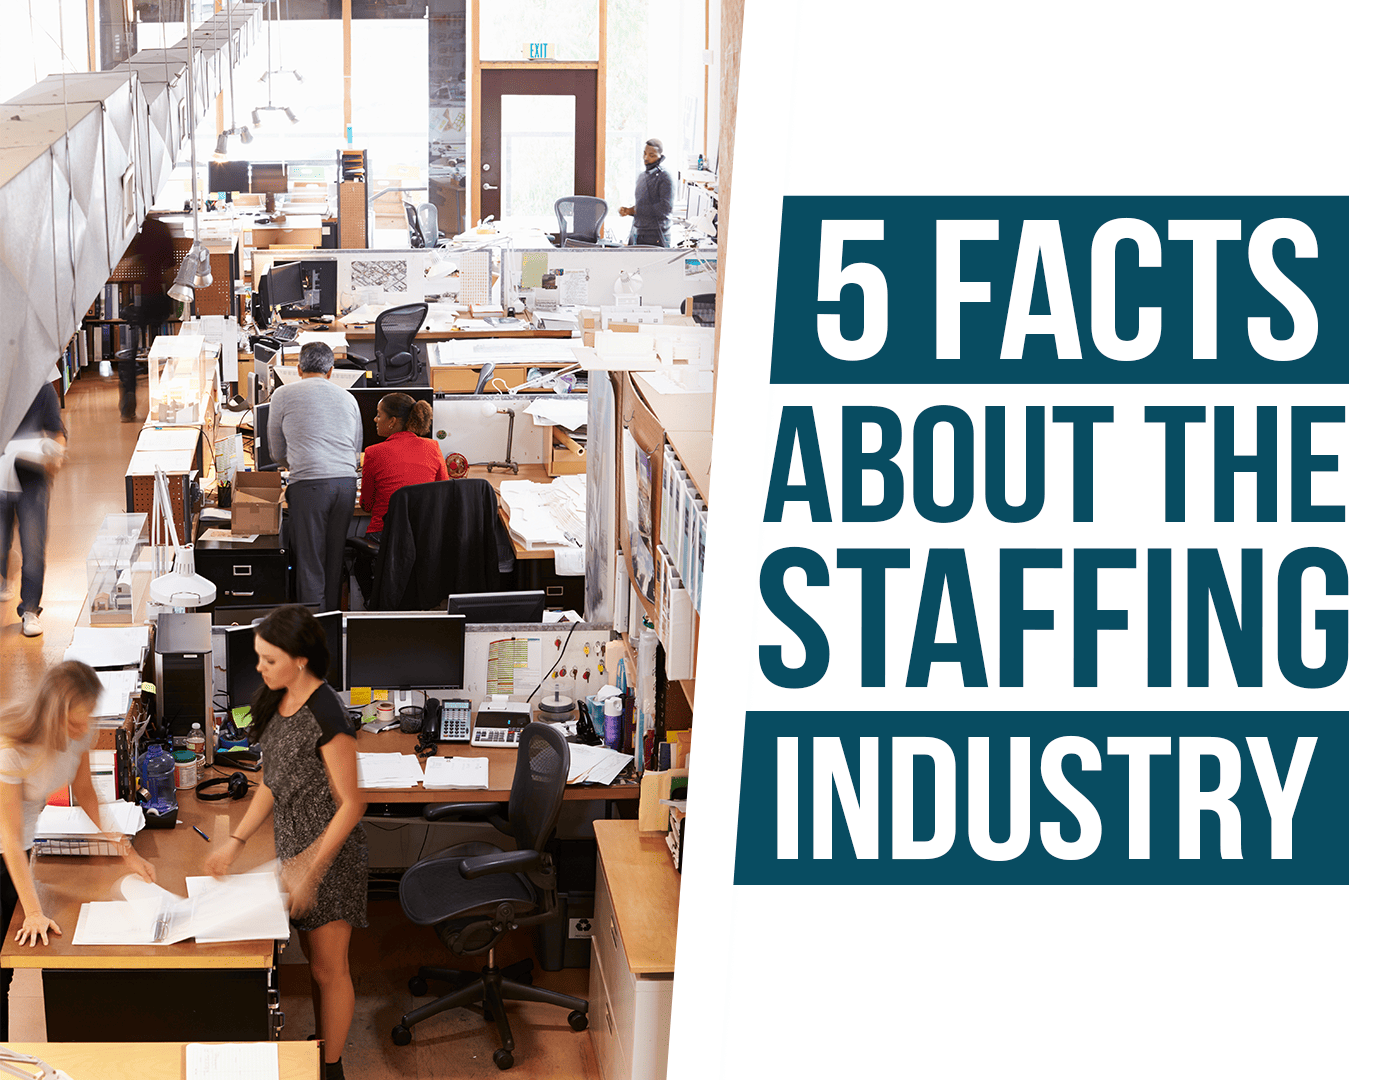 Facts about the staffing industry